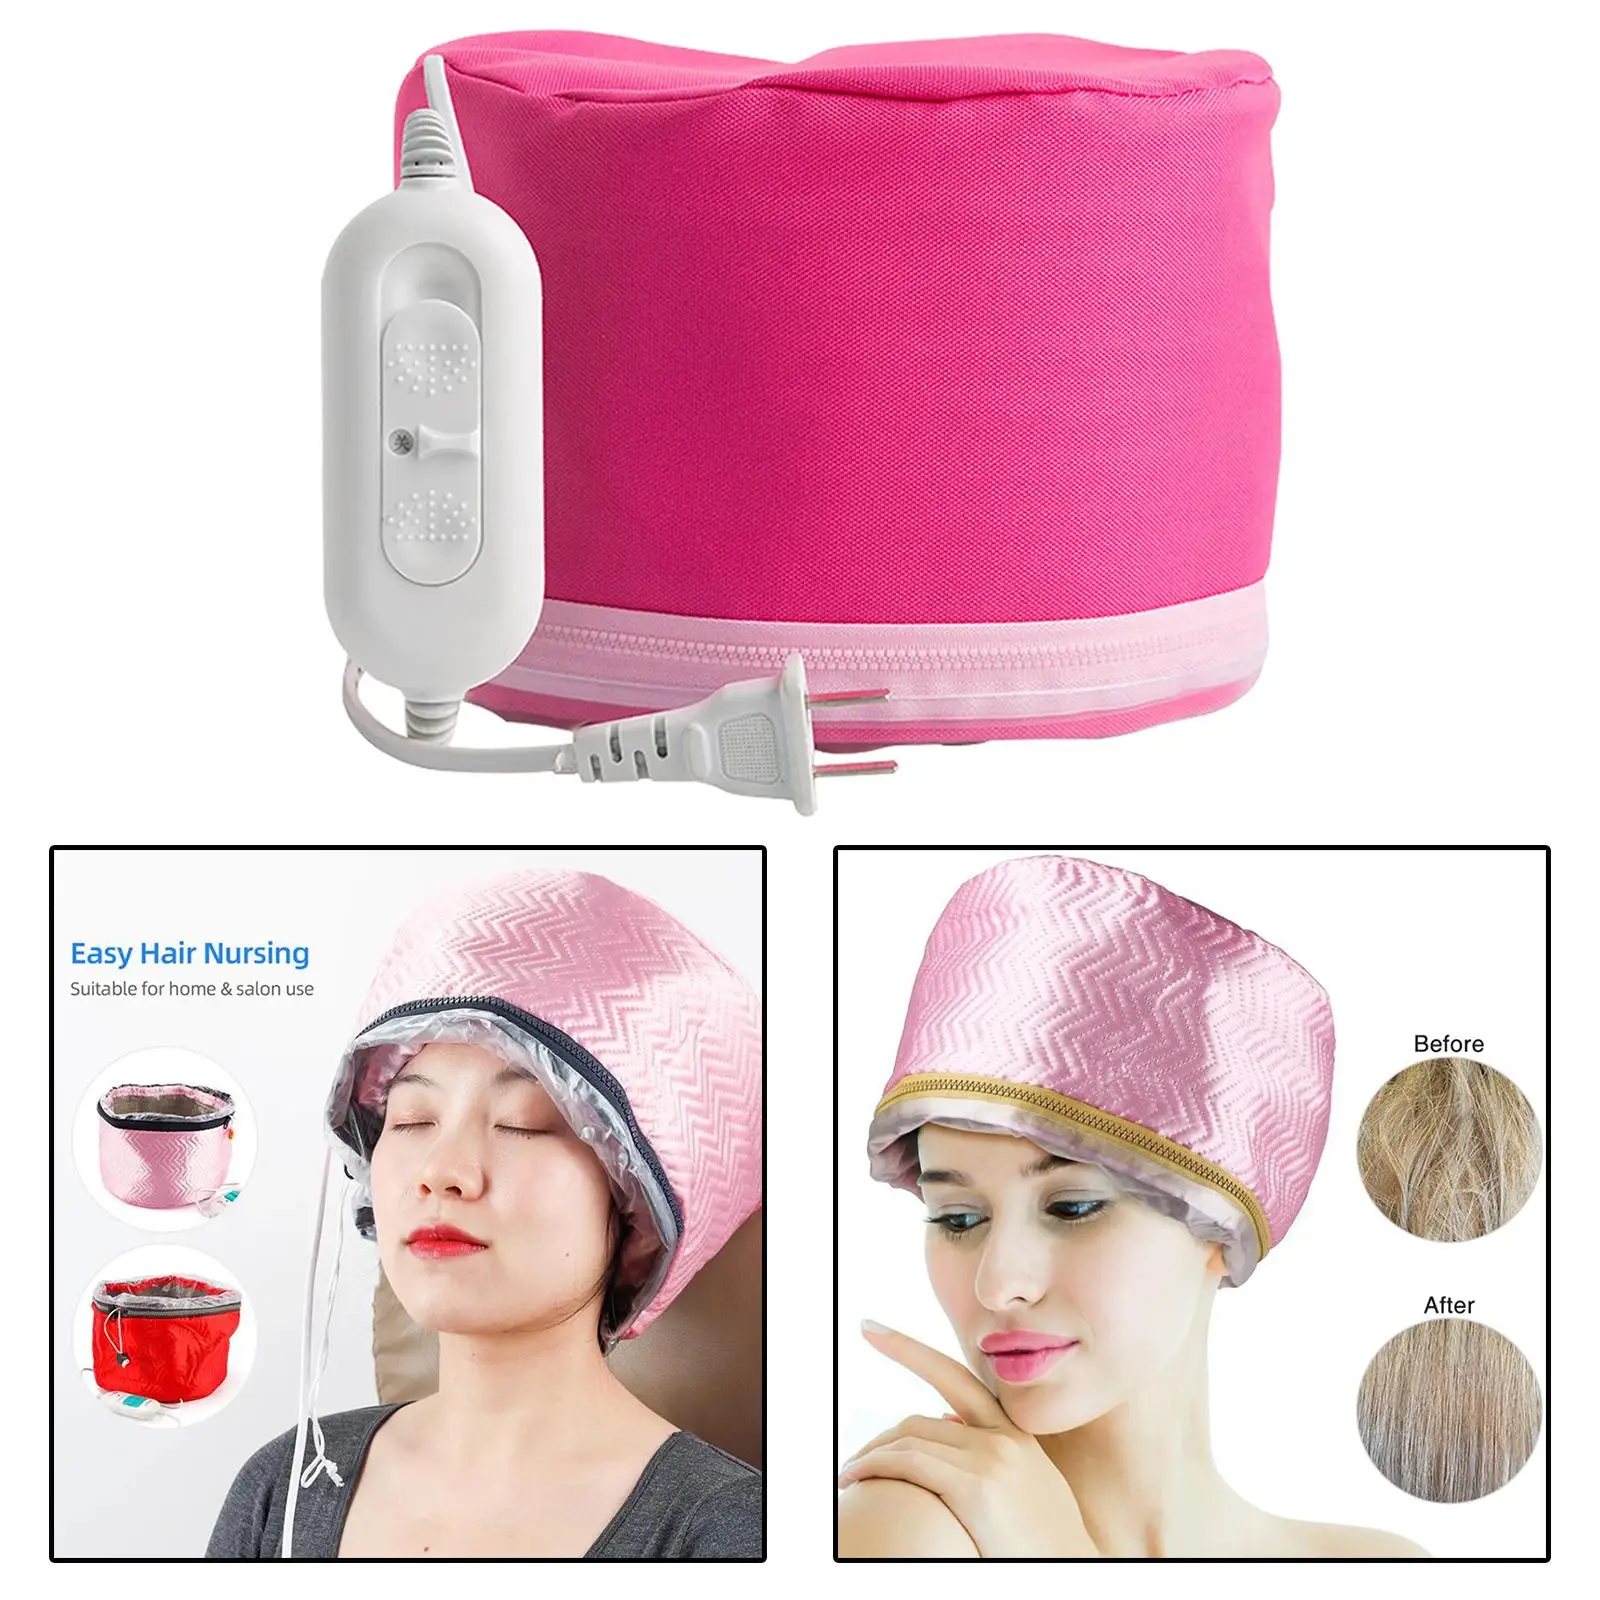 Hair Heating Caps Steamer 3-Mode Adjustable Size Safe Essential Oil Caps for Deep Conditioning Home Salon Hair SPA Women Men